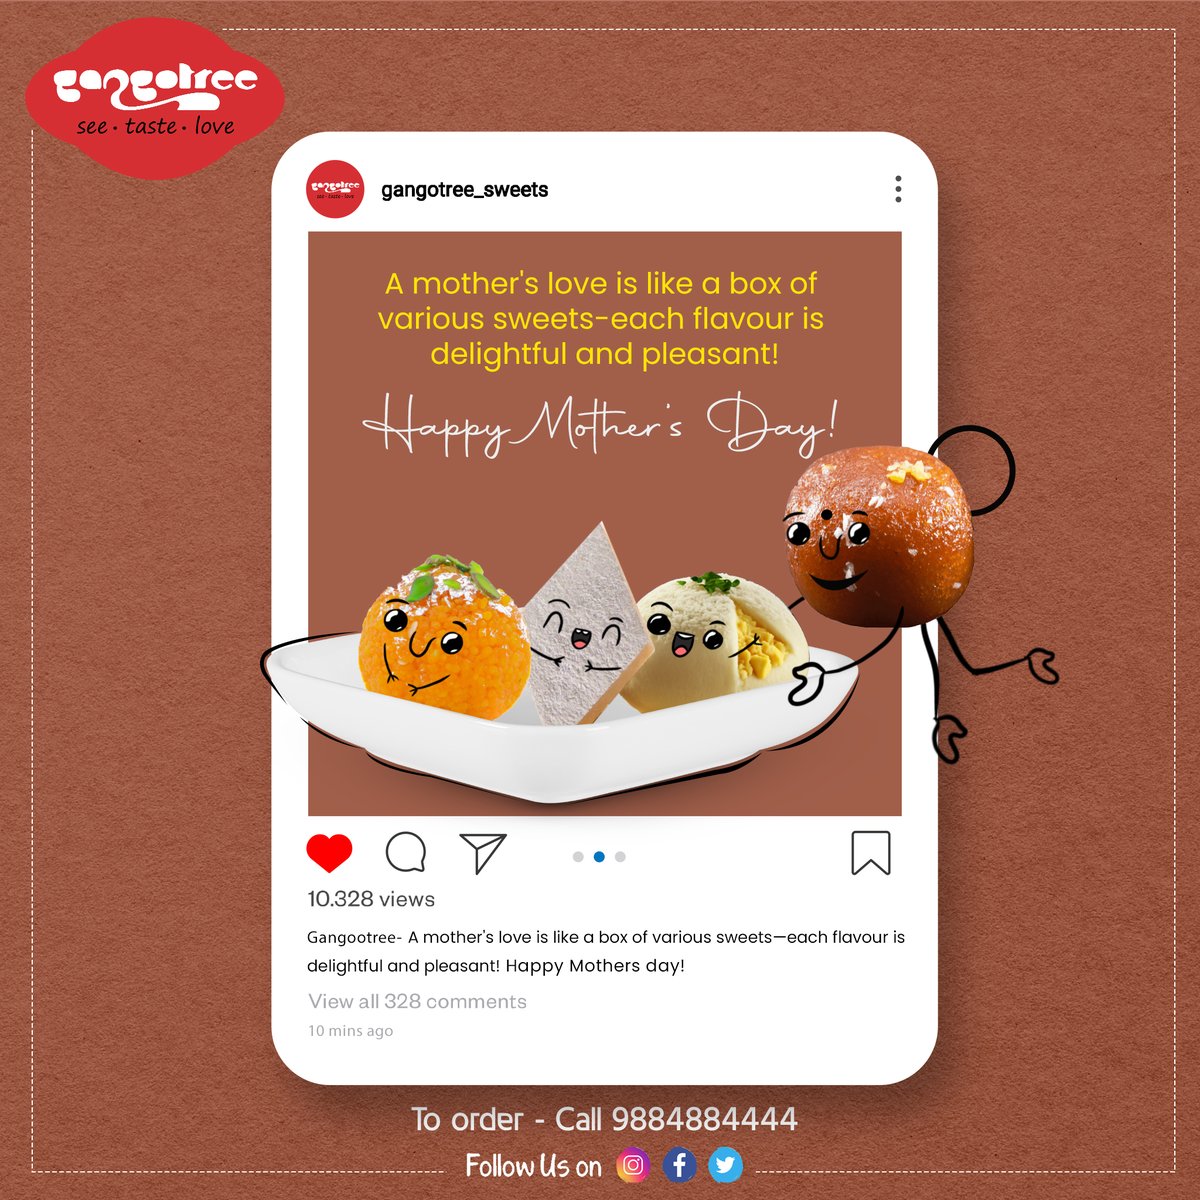 Give your sweet mom the sweetest treat this Mother's Day! Order now from our delectable selection of sweets and show her how much you love her!

#gangotree #gangotreesweets #happymothersday #happymothersday2023